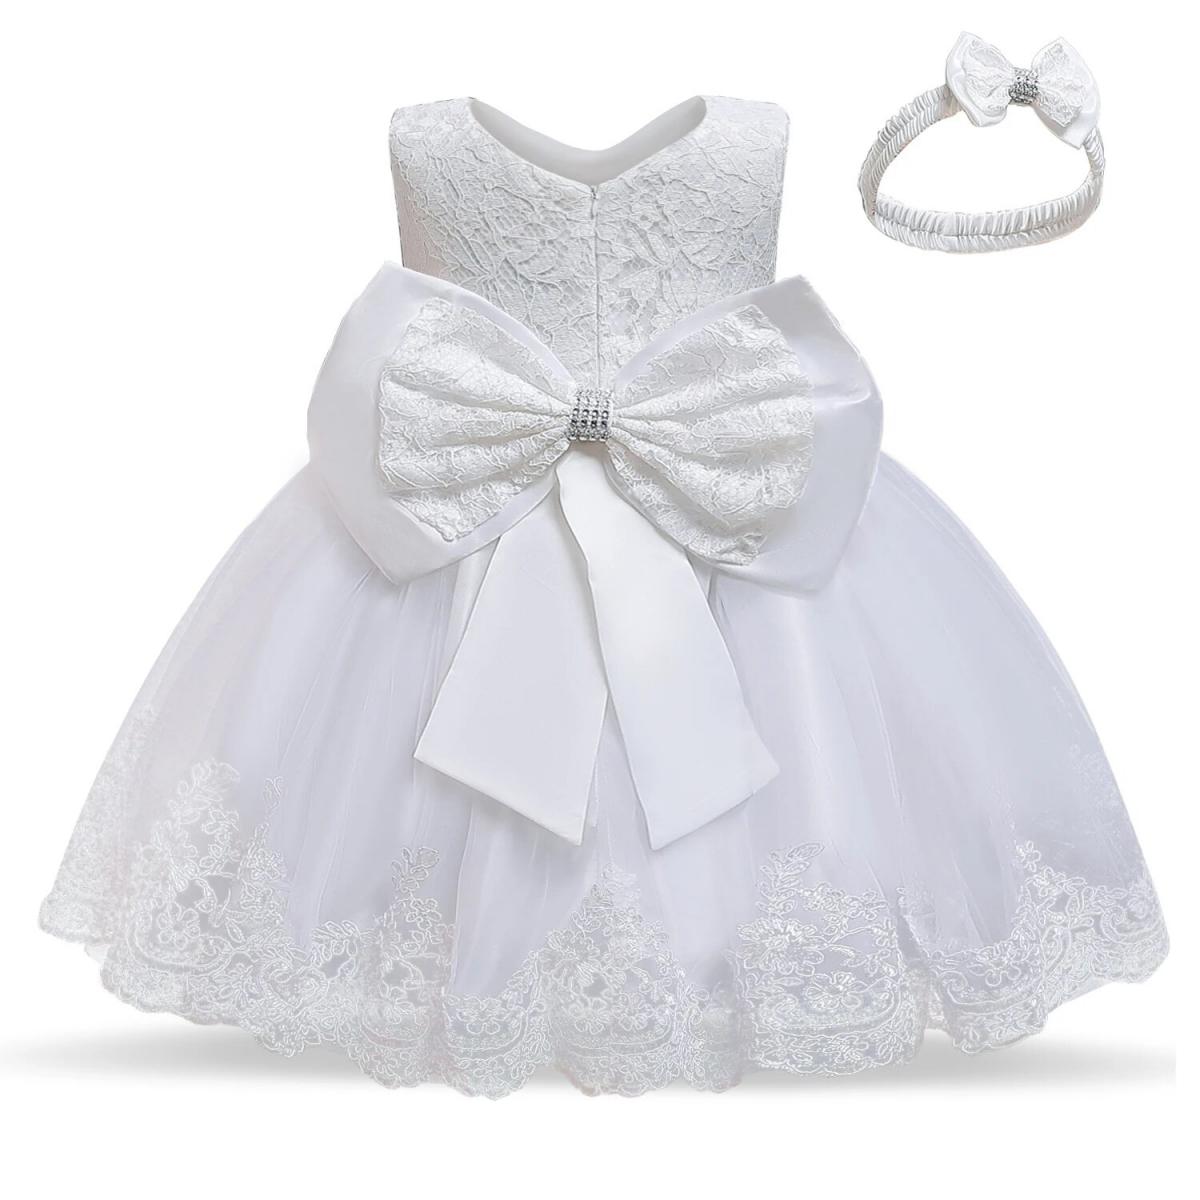 18 Months Baby Girl Wedding Dress  6 Month Baby Dress Wedding  12 Lace Floral Dress  